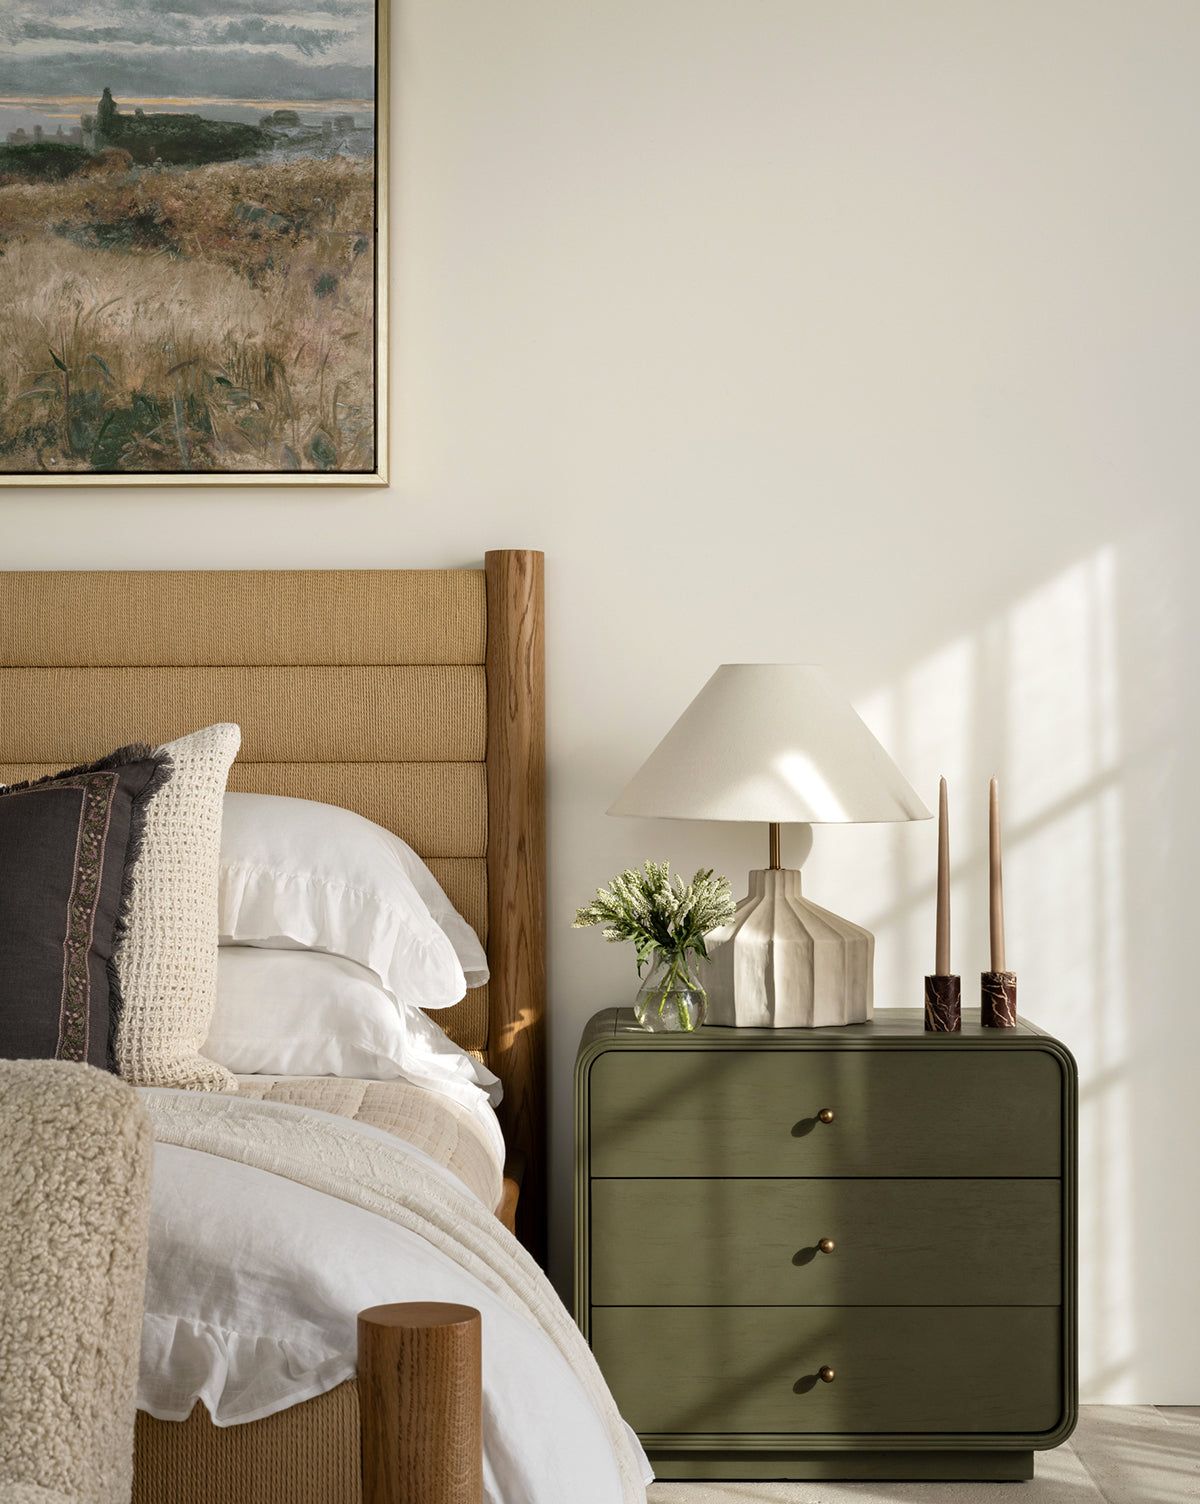 Nightstand Designs For Bedroom : Stylish and Functional Nightstand Designs for Bedroom Décor